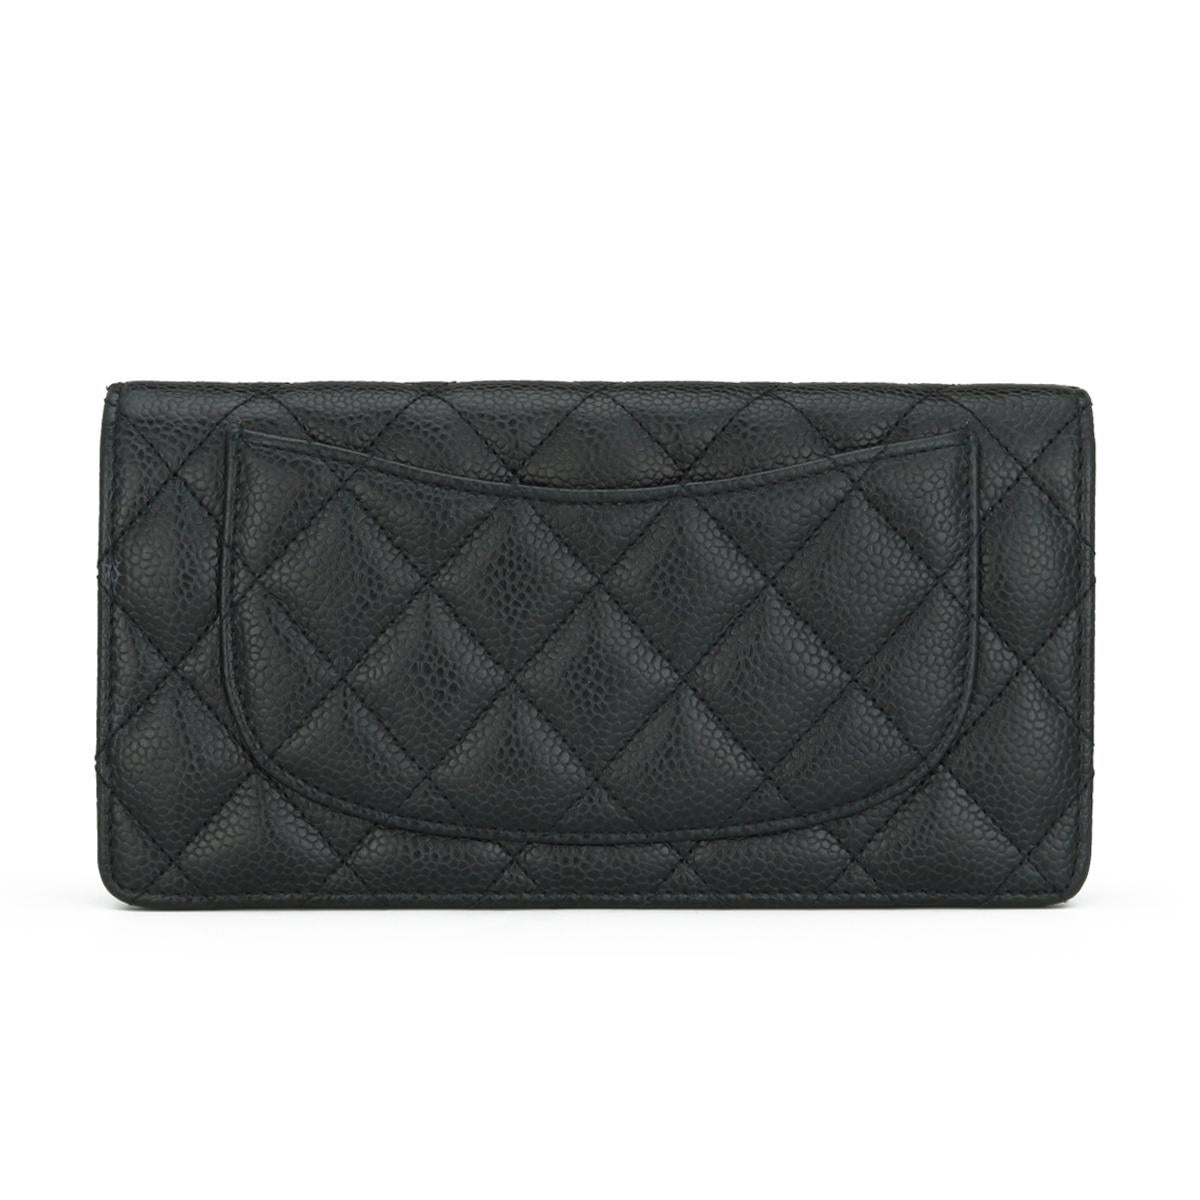 Chanel Quilted Classic Long Flap Yen Wallet in Black Caviar Silver Hardware 2014 In Good Condition For Sale In Huddersfield, GB